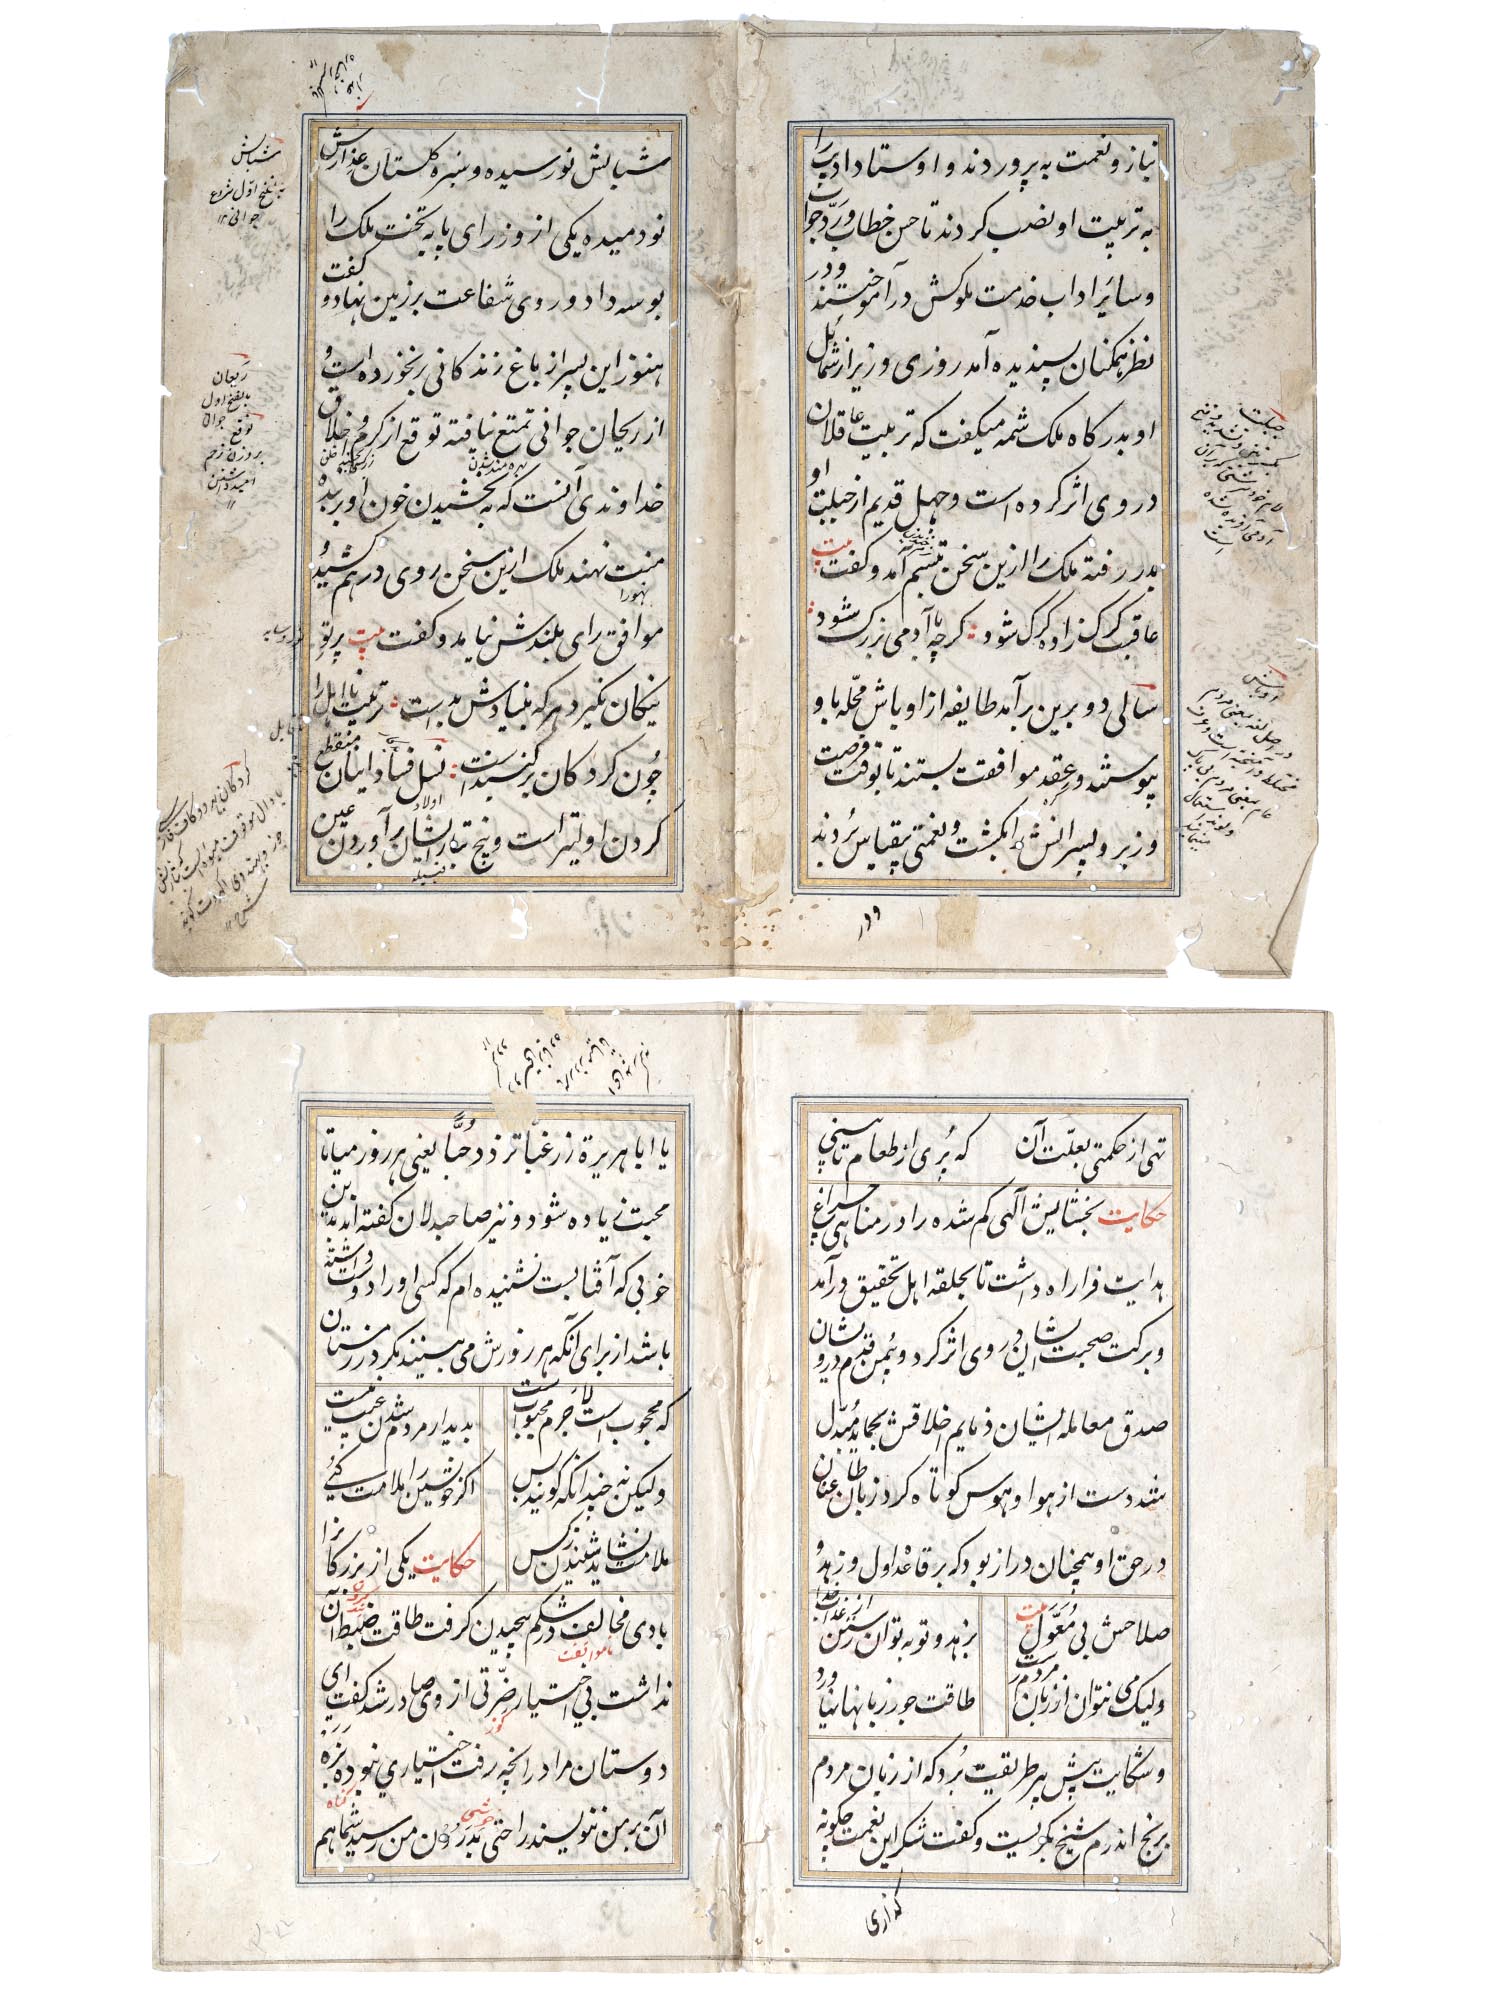 ANTIQUE ARABIC PAGES FROM THE QURAN MANUSCRIPTS PIC-1